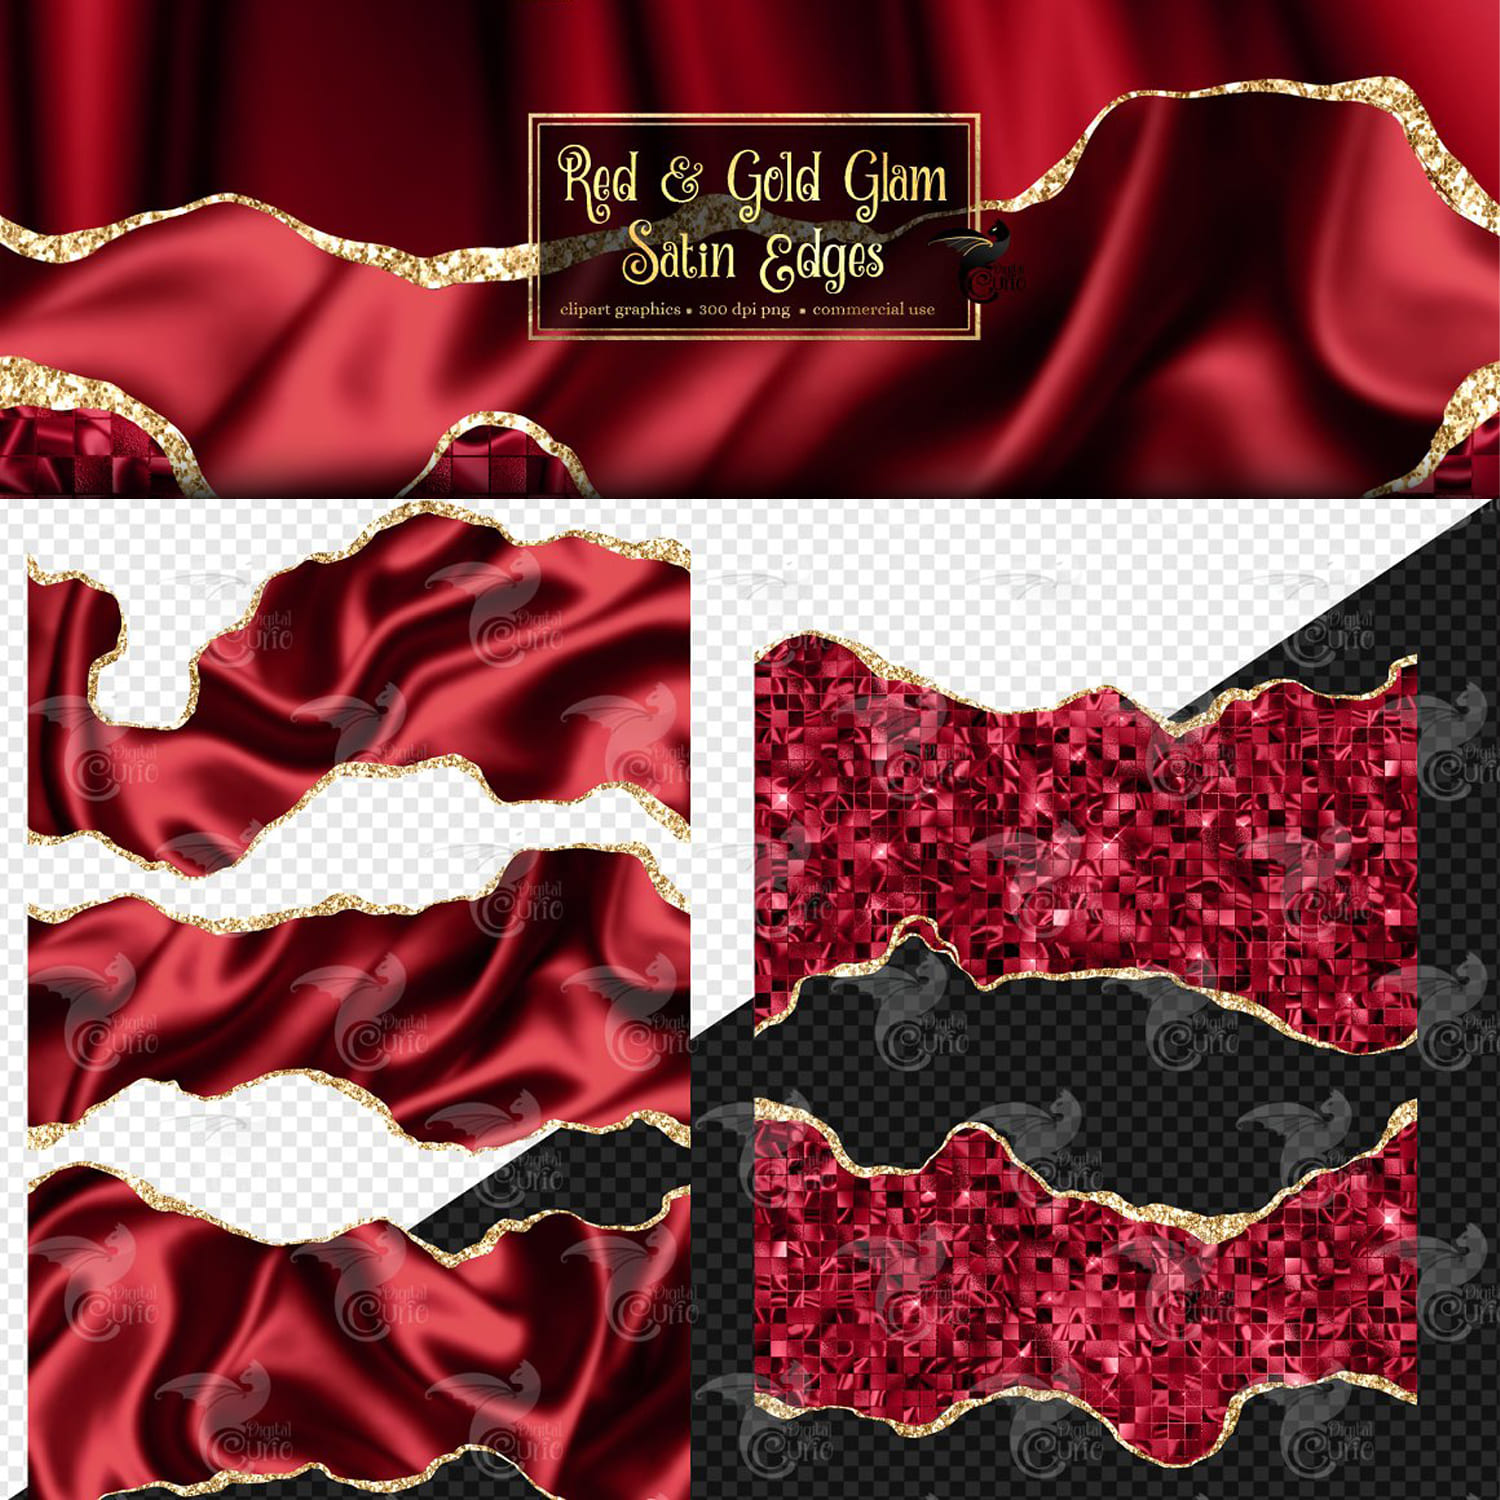 Red and Gold Glam Satin Edges created by Digital Curio.